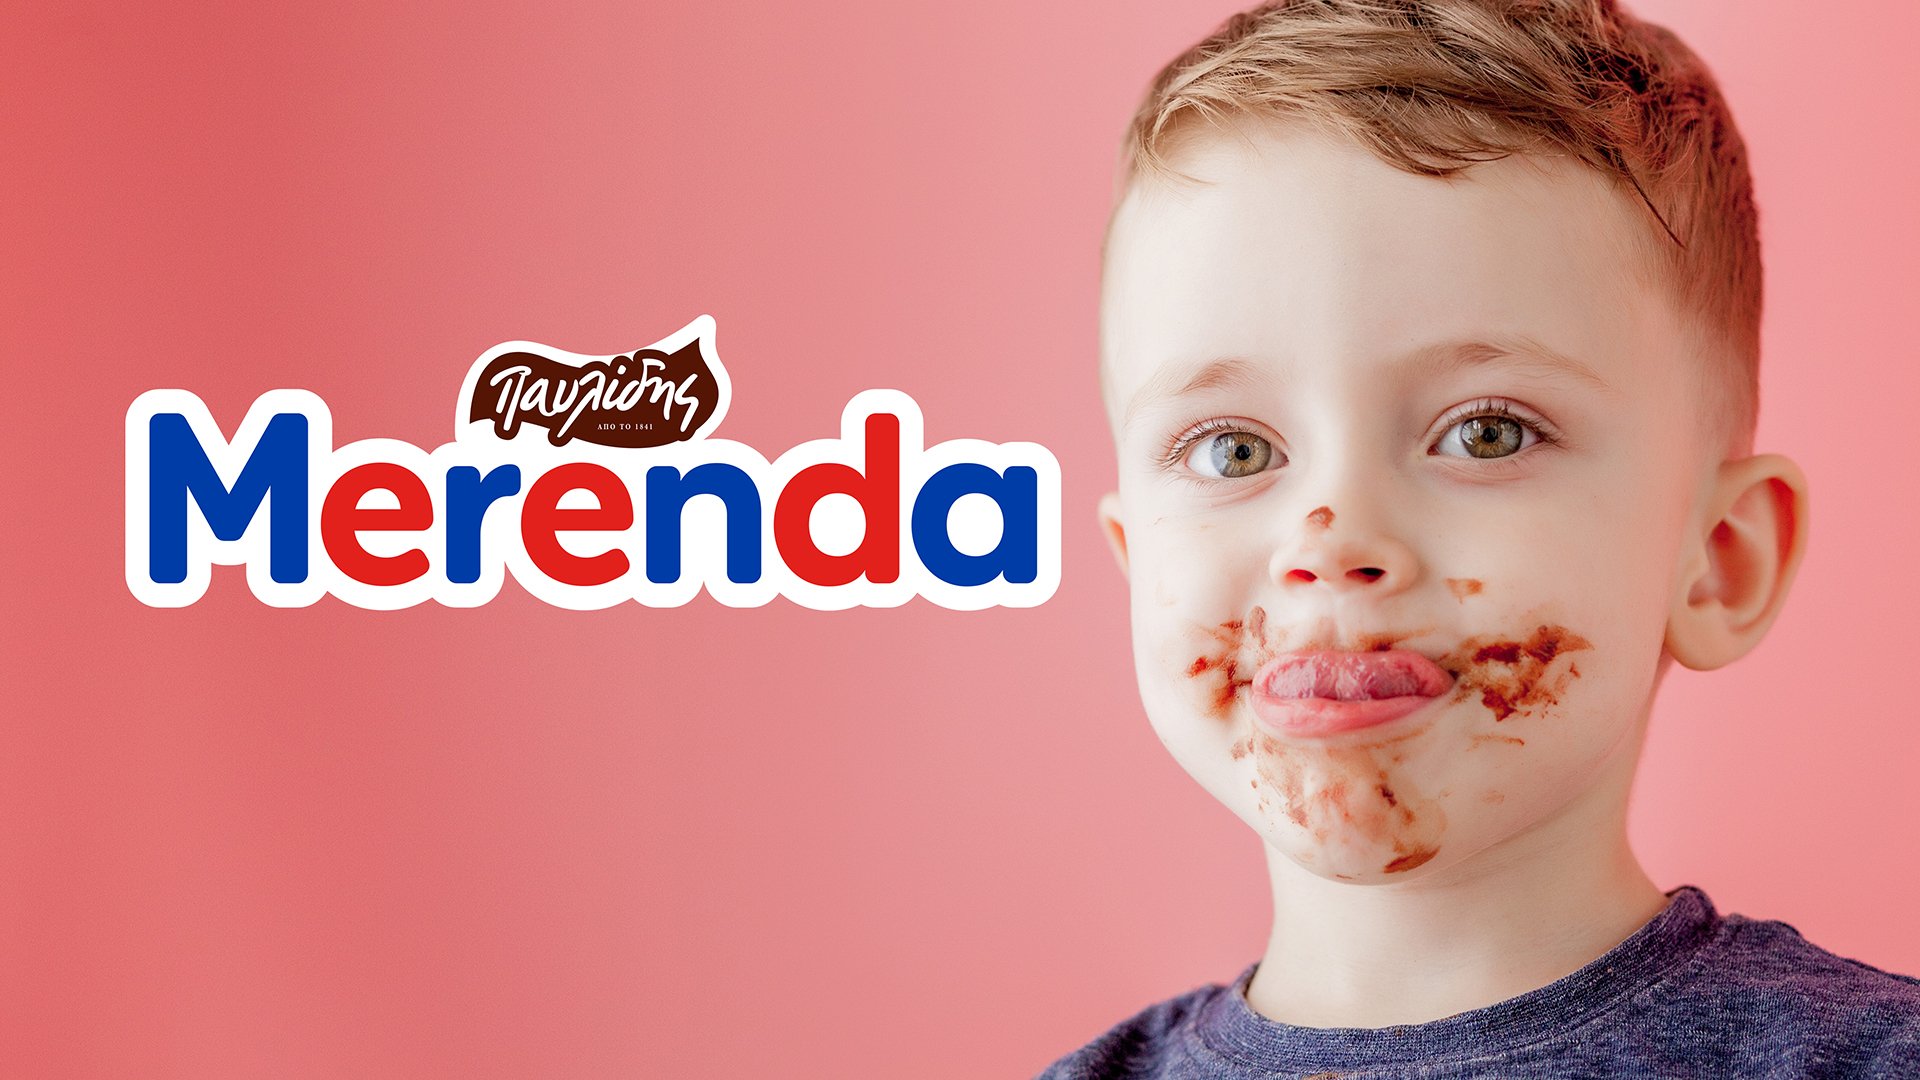 Merenda chocolate spread new logo next to child with chocolate smeared on his face